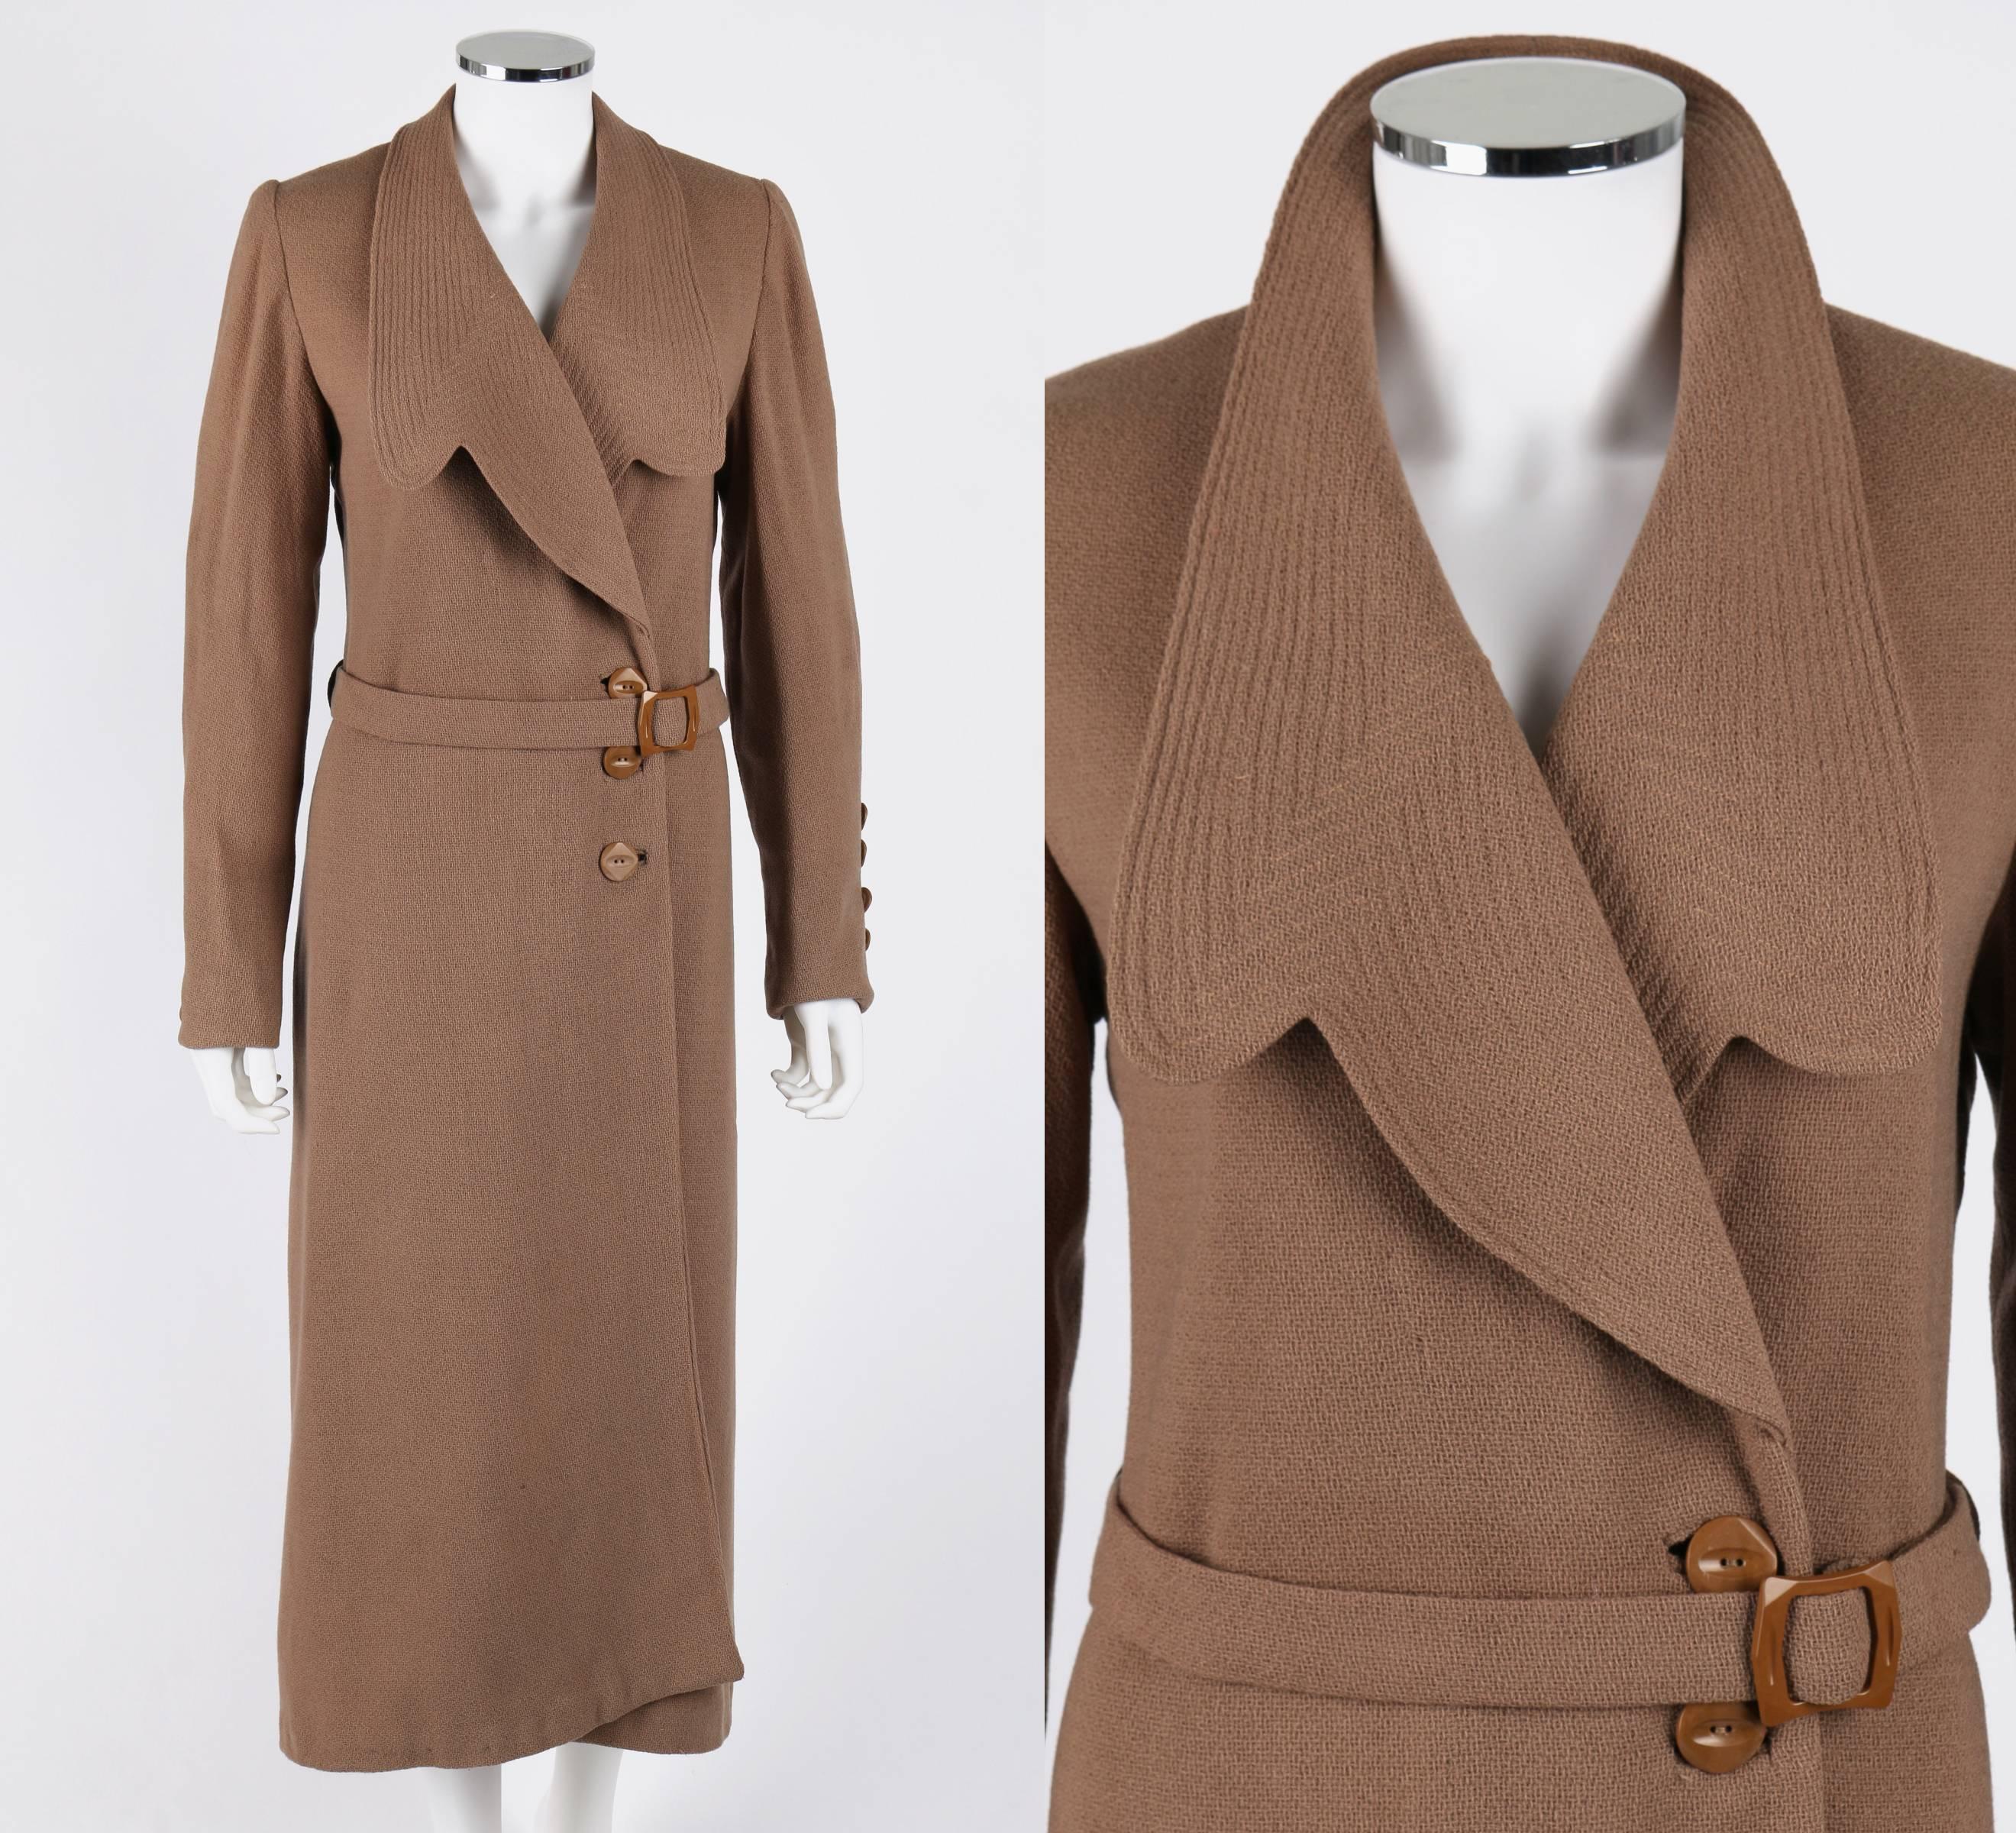 OOAK Vintage 1900s-1910s Edwardian tan long coat. Large notched lapel with topstitching. Long sleeves with pintuck detail. 5 buttons on cuff. Center front three-button closure. Princess seams at back. Two belt loops. Long belt with buckle. Unmarked